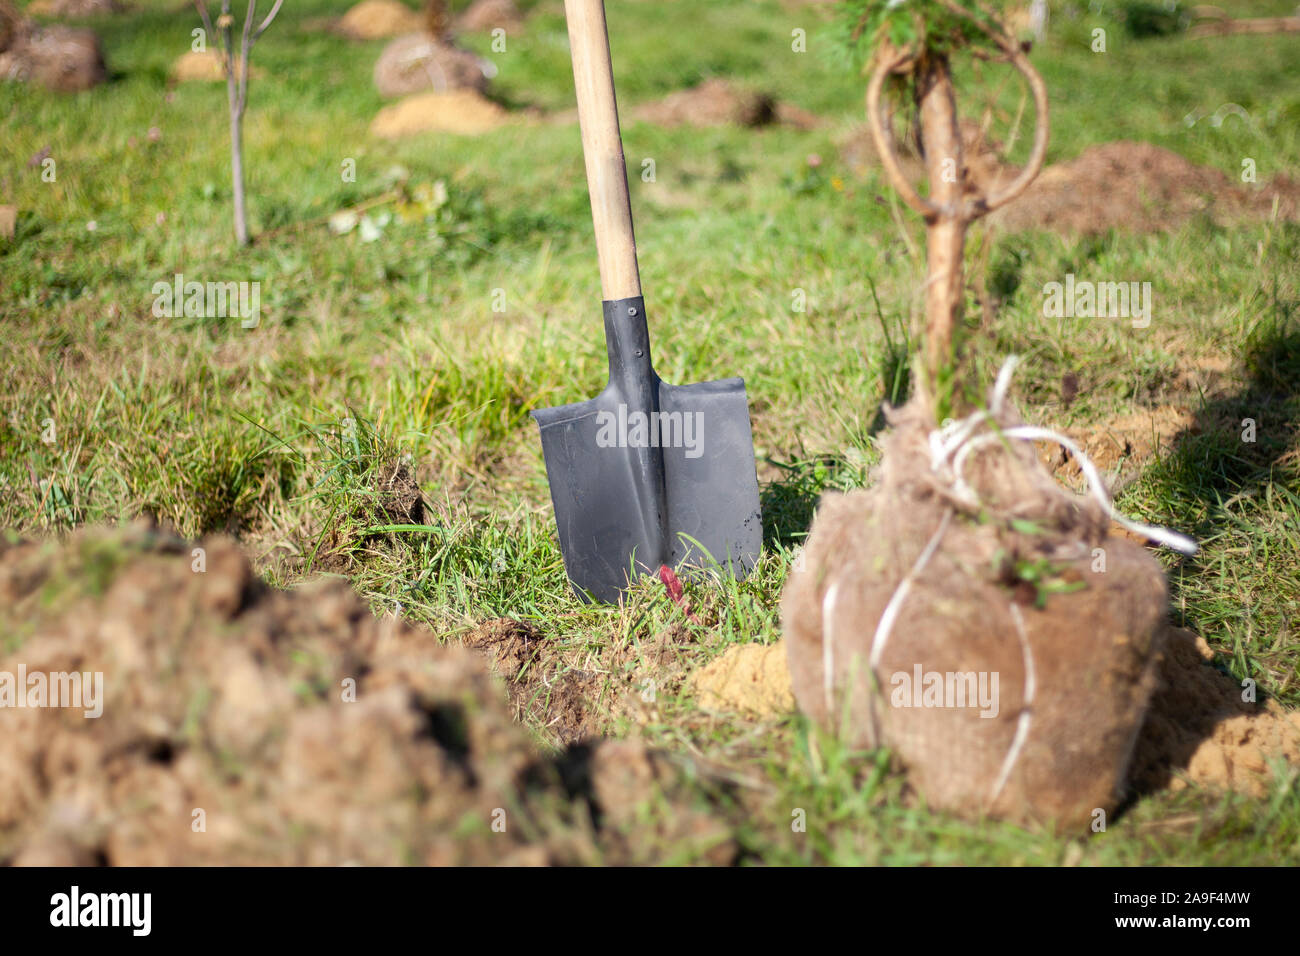 Planting trees in the ground. Garden tools for digging the ground. Planting a seedling and caring for it. Volunteers reinvent the forest. Creating a t Stock Photo